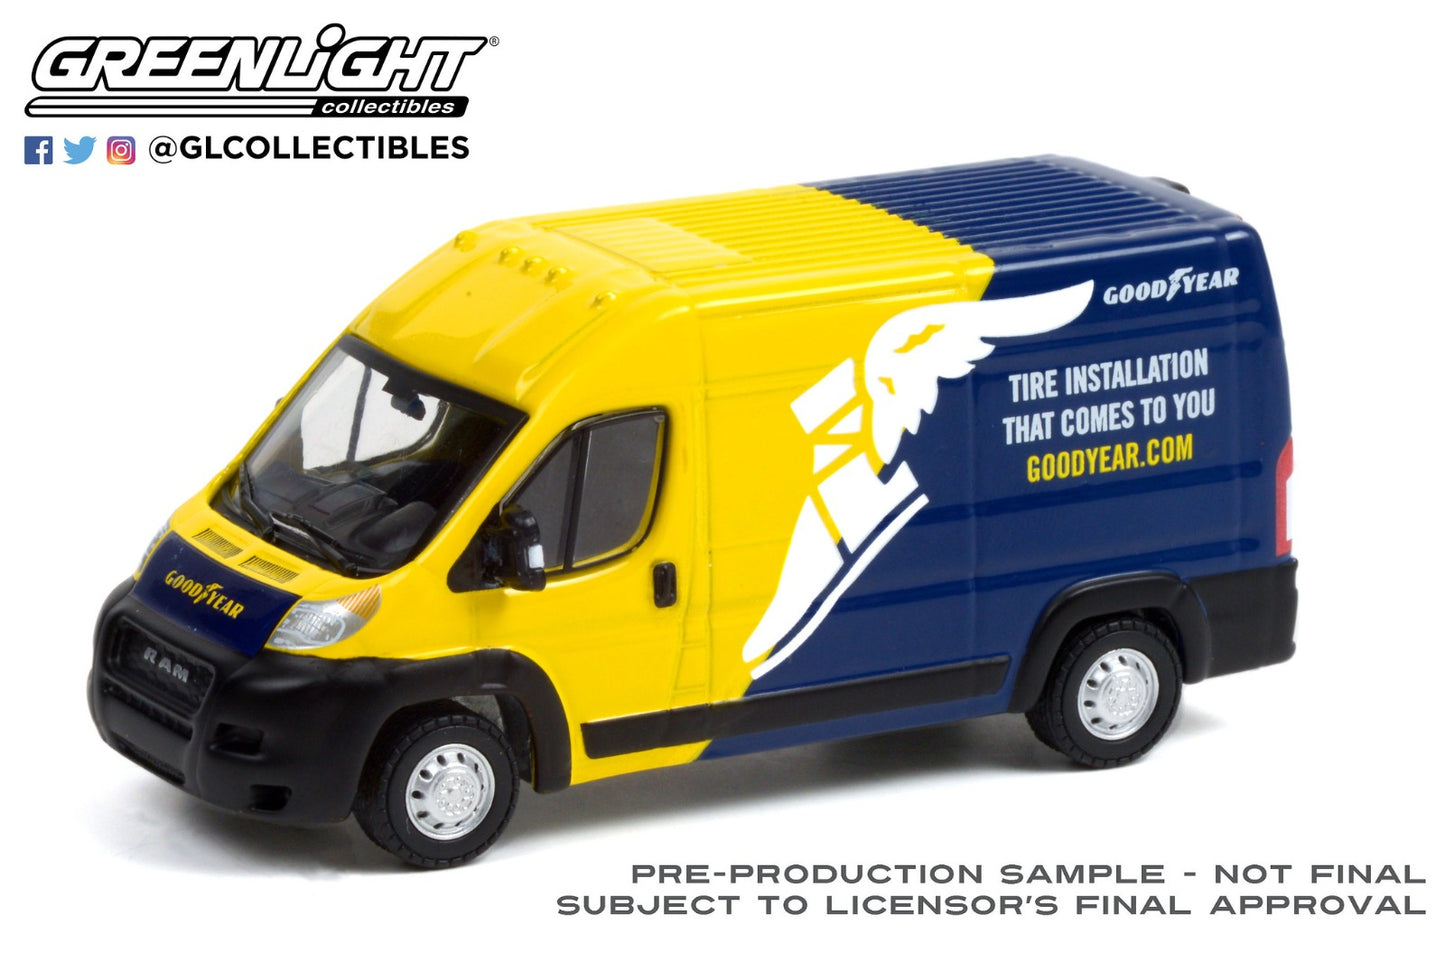 GreenLight 1:64 Route Runners Series 3 - 2019 Dodge Ram ProMaster 2500 Cargo High Roof - Goodyear Tire Installation That Comes To You 53030-E